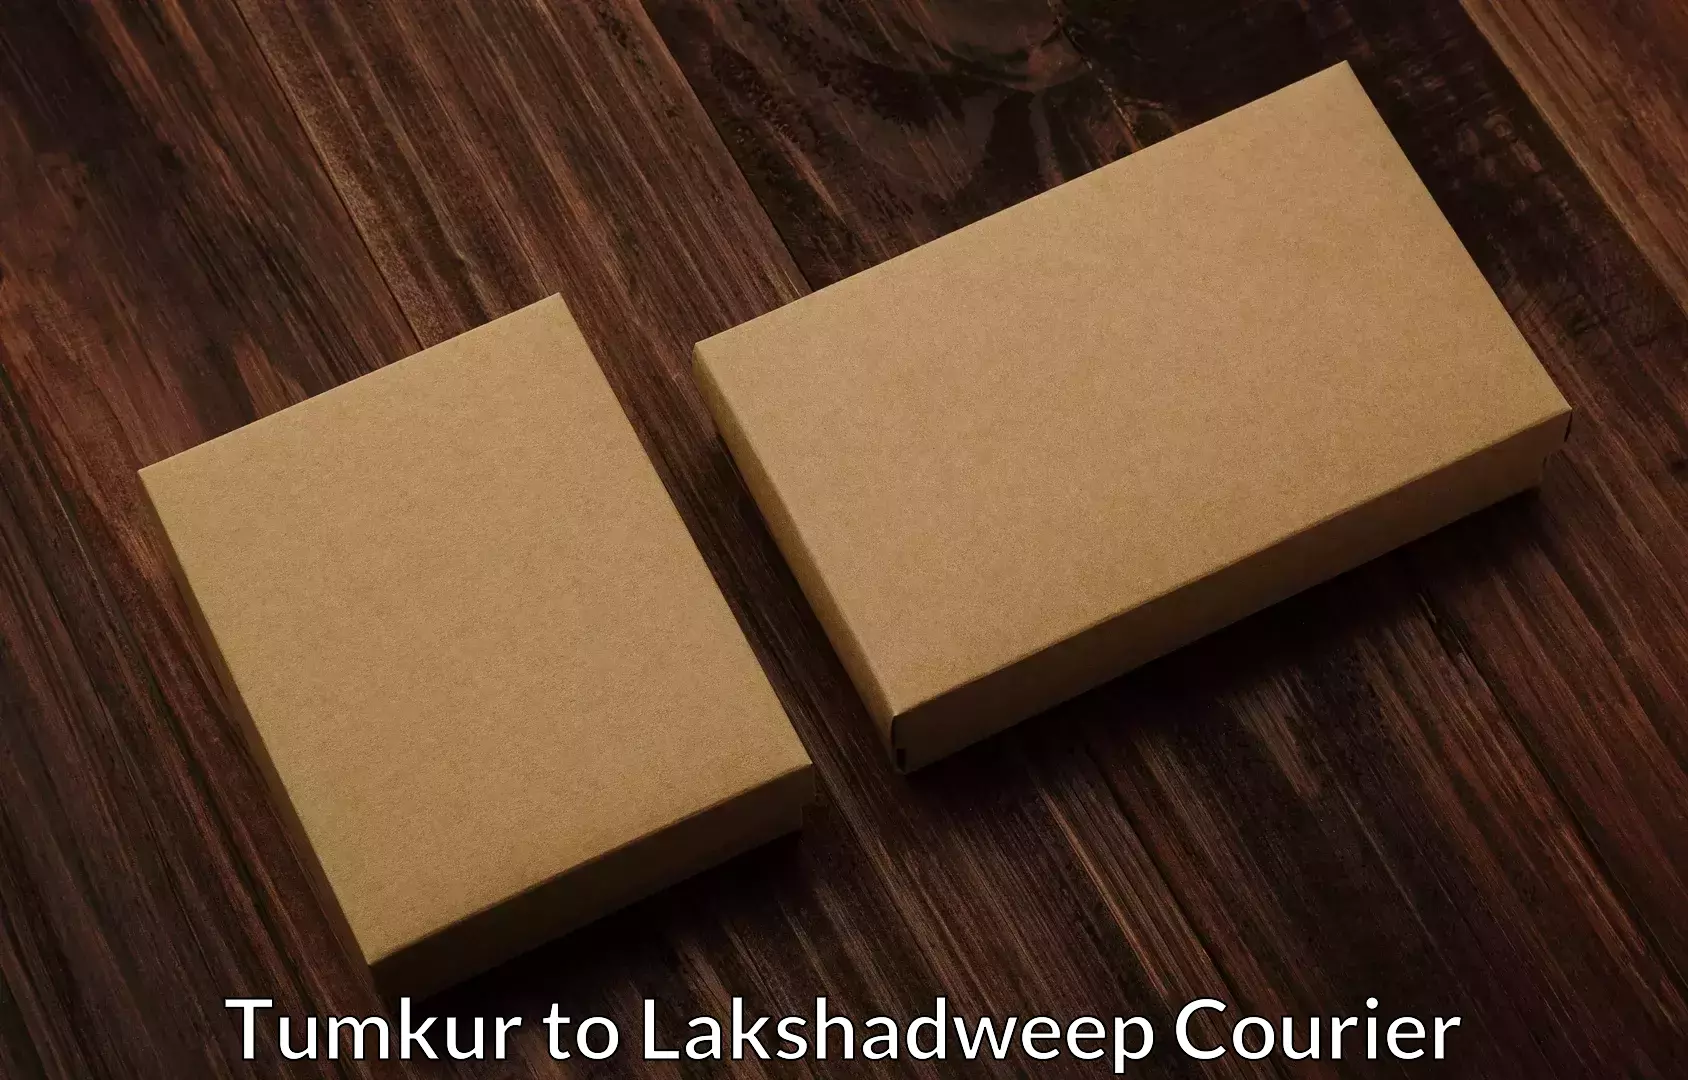 Home relocation experts Tumkur to Lakshadweep